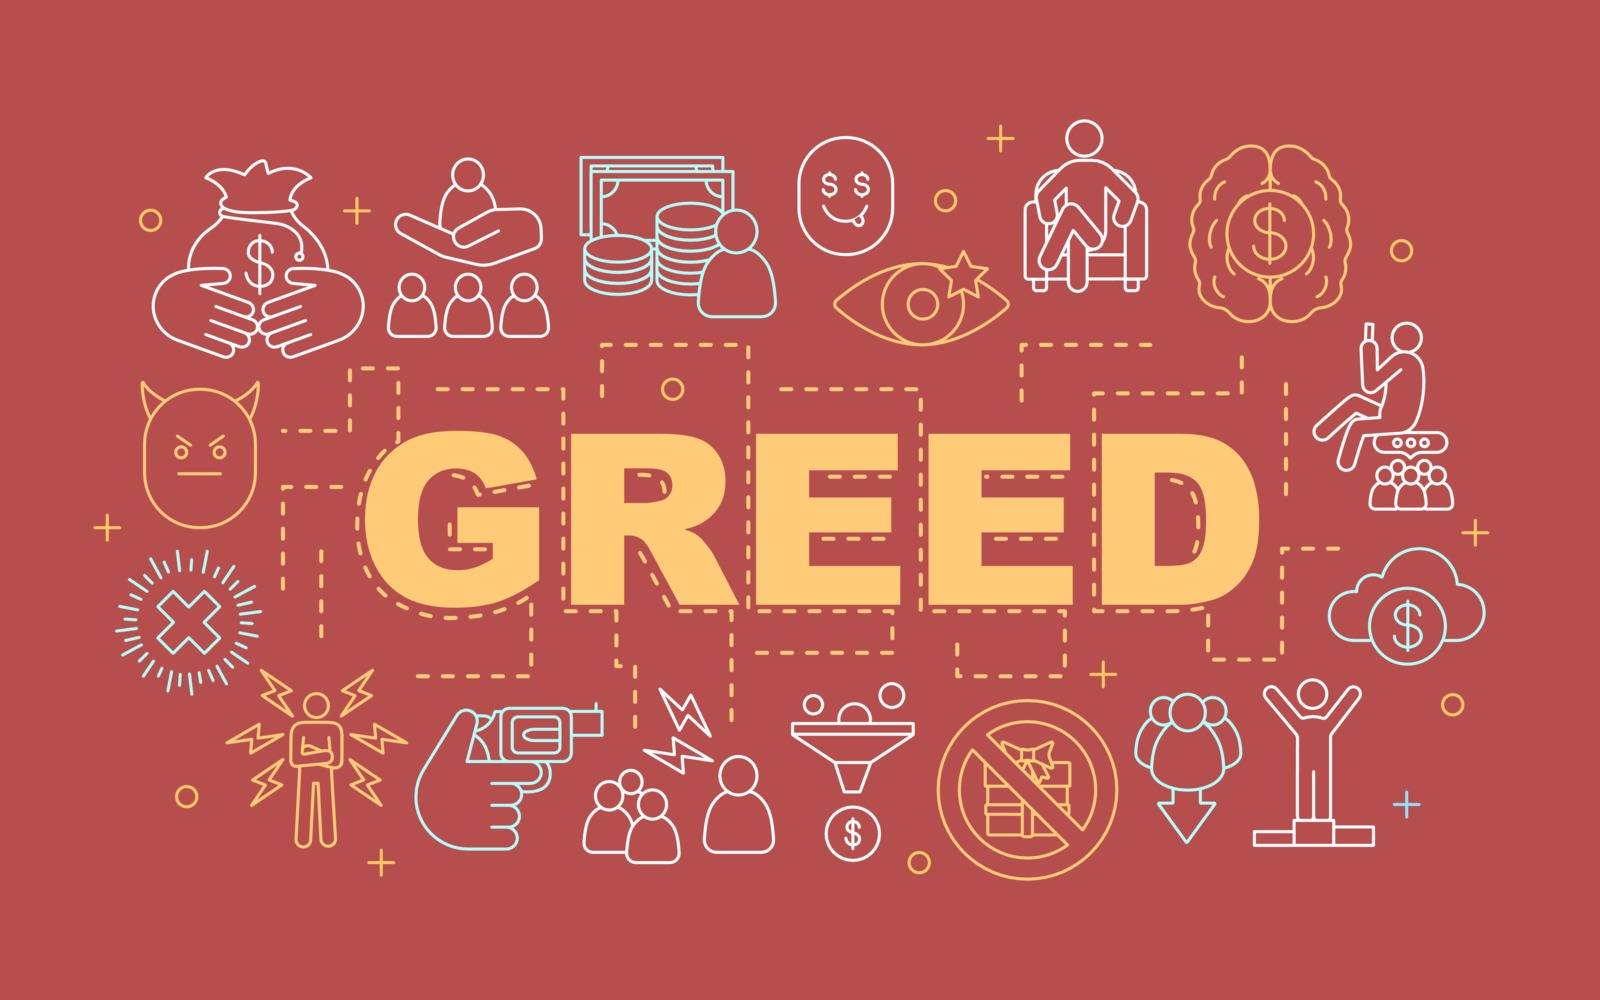 Greed word concepts banner by bsd